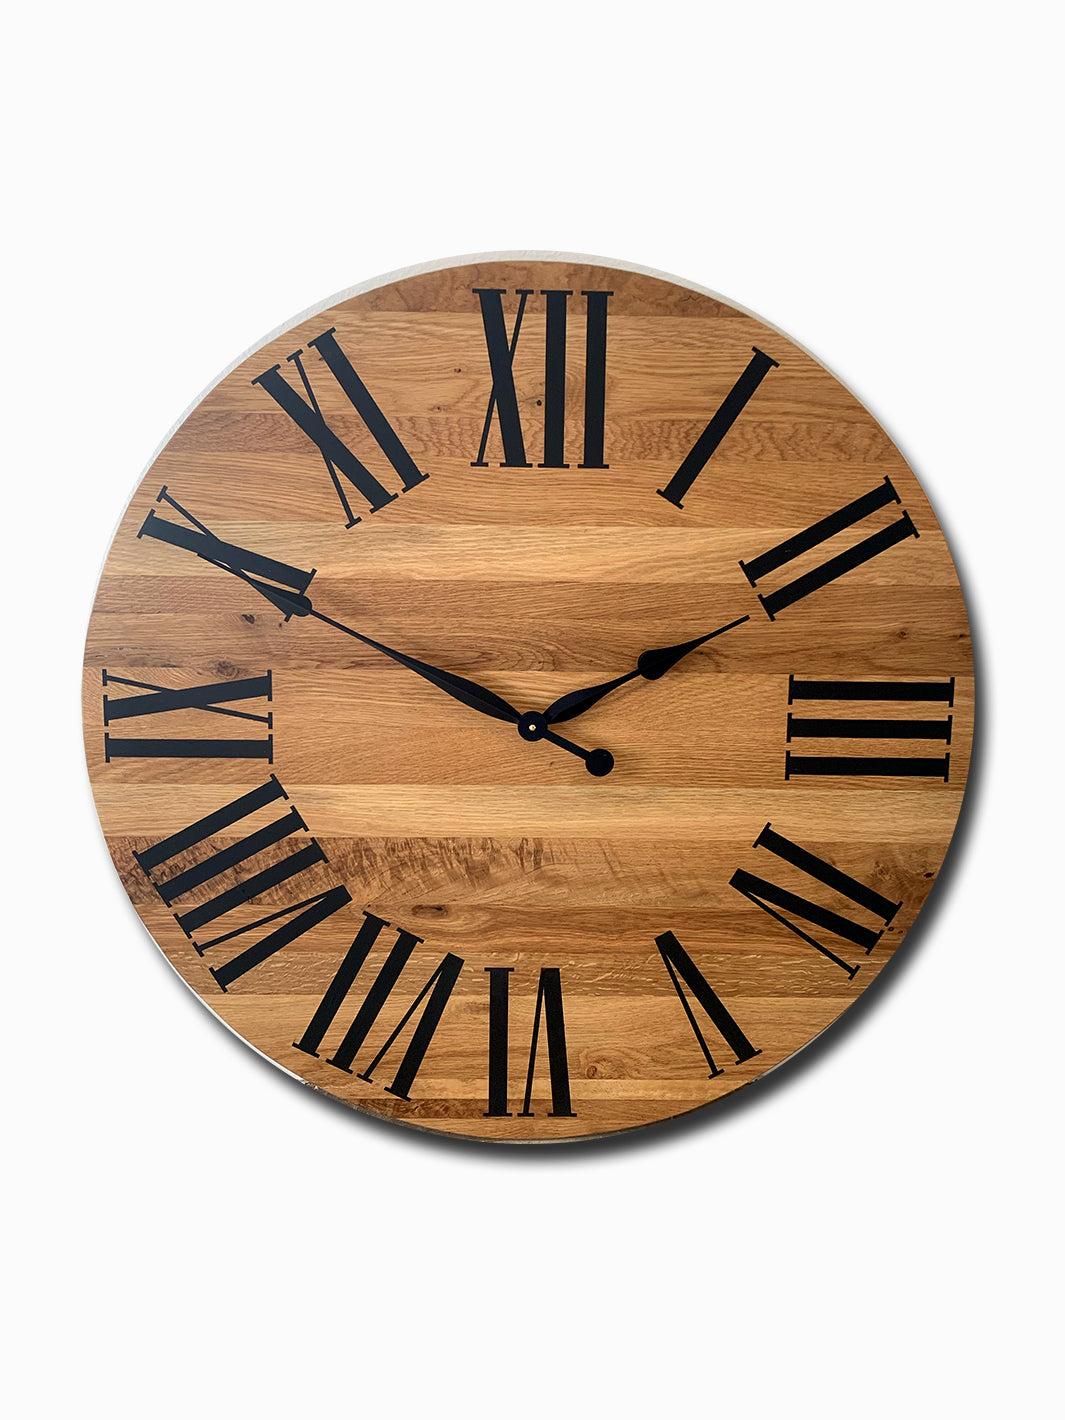 Large White Oak Wall Clock with Black Roman Numerals Earthly Comfort Clocks 2084